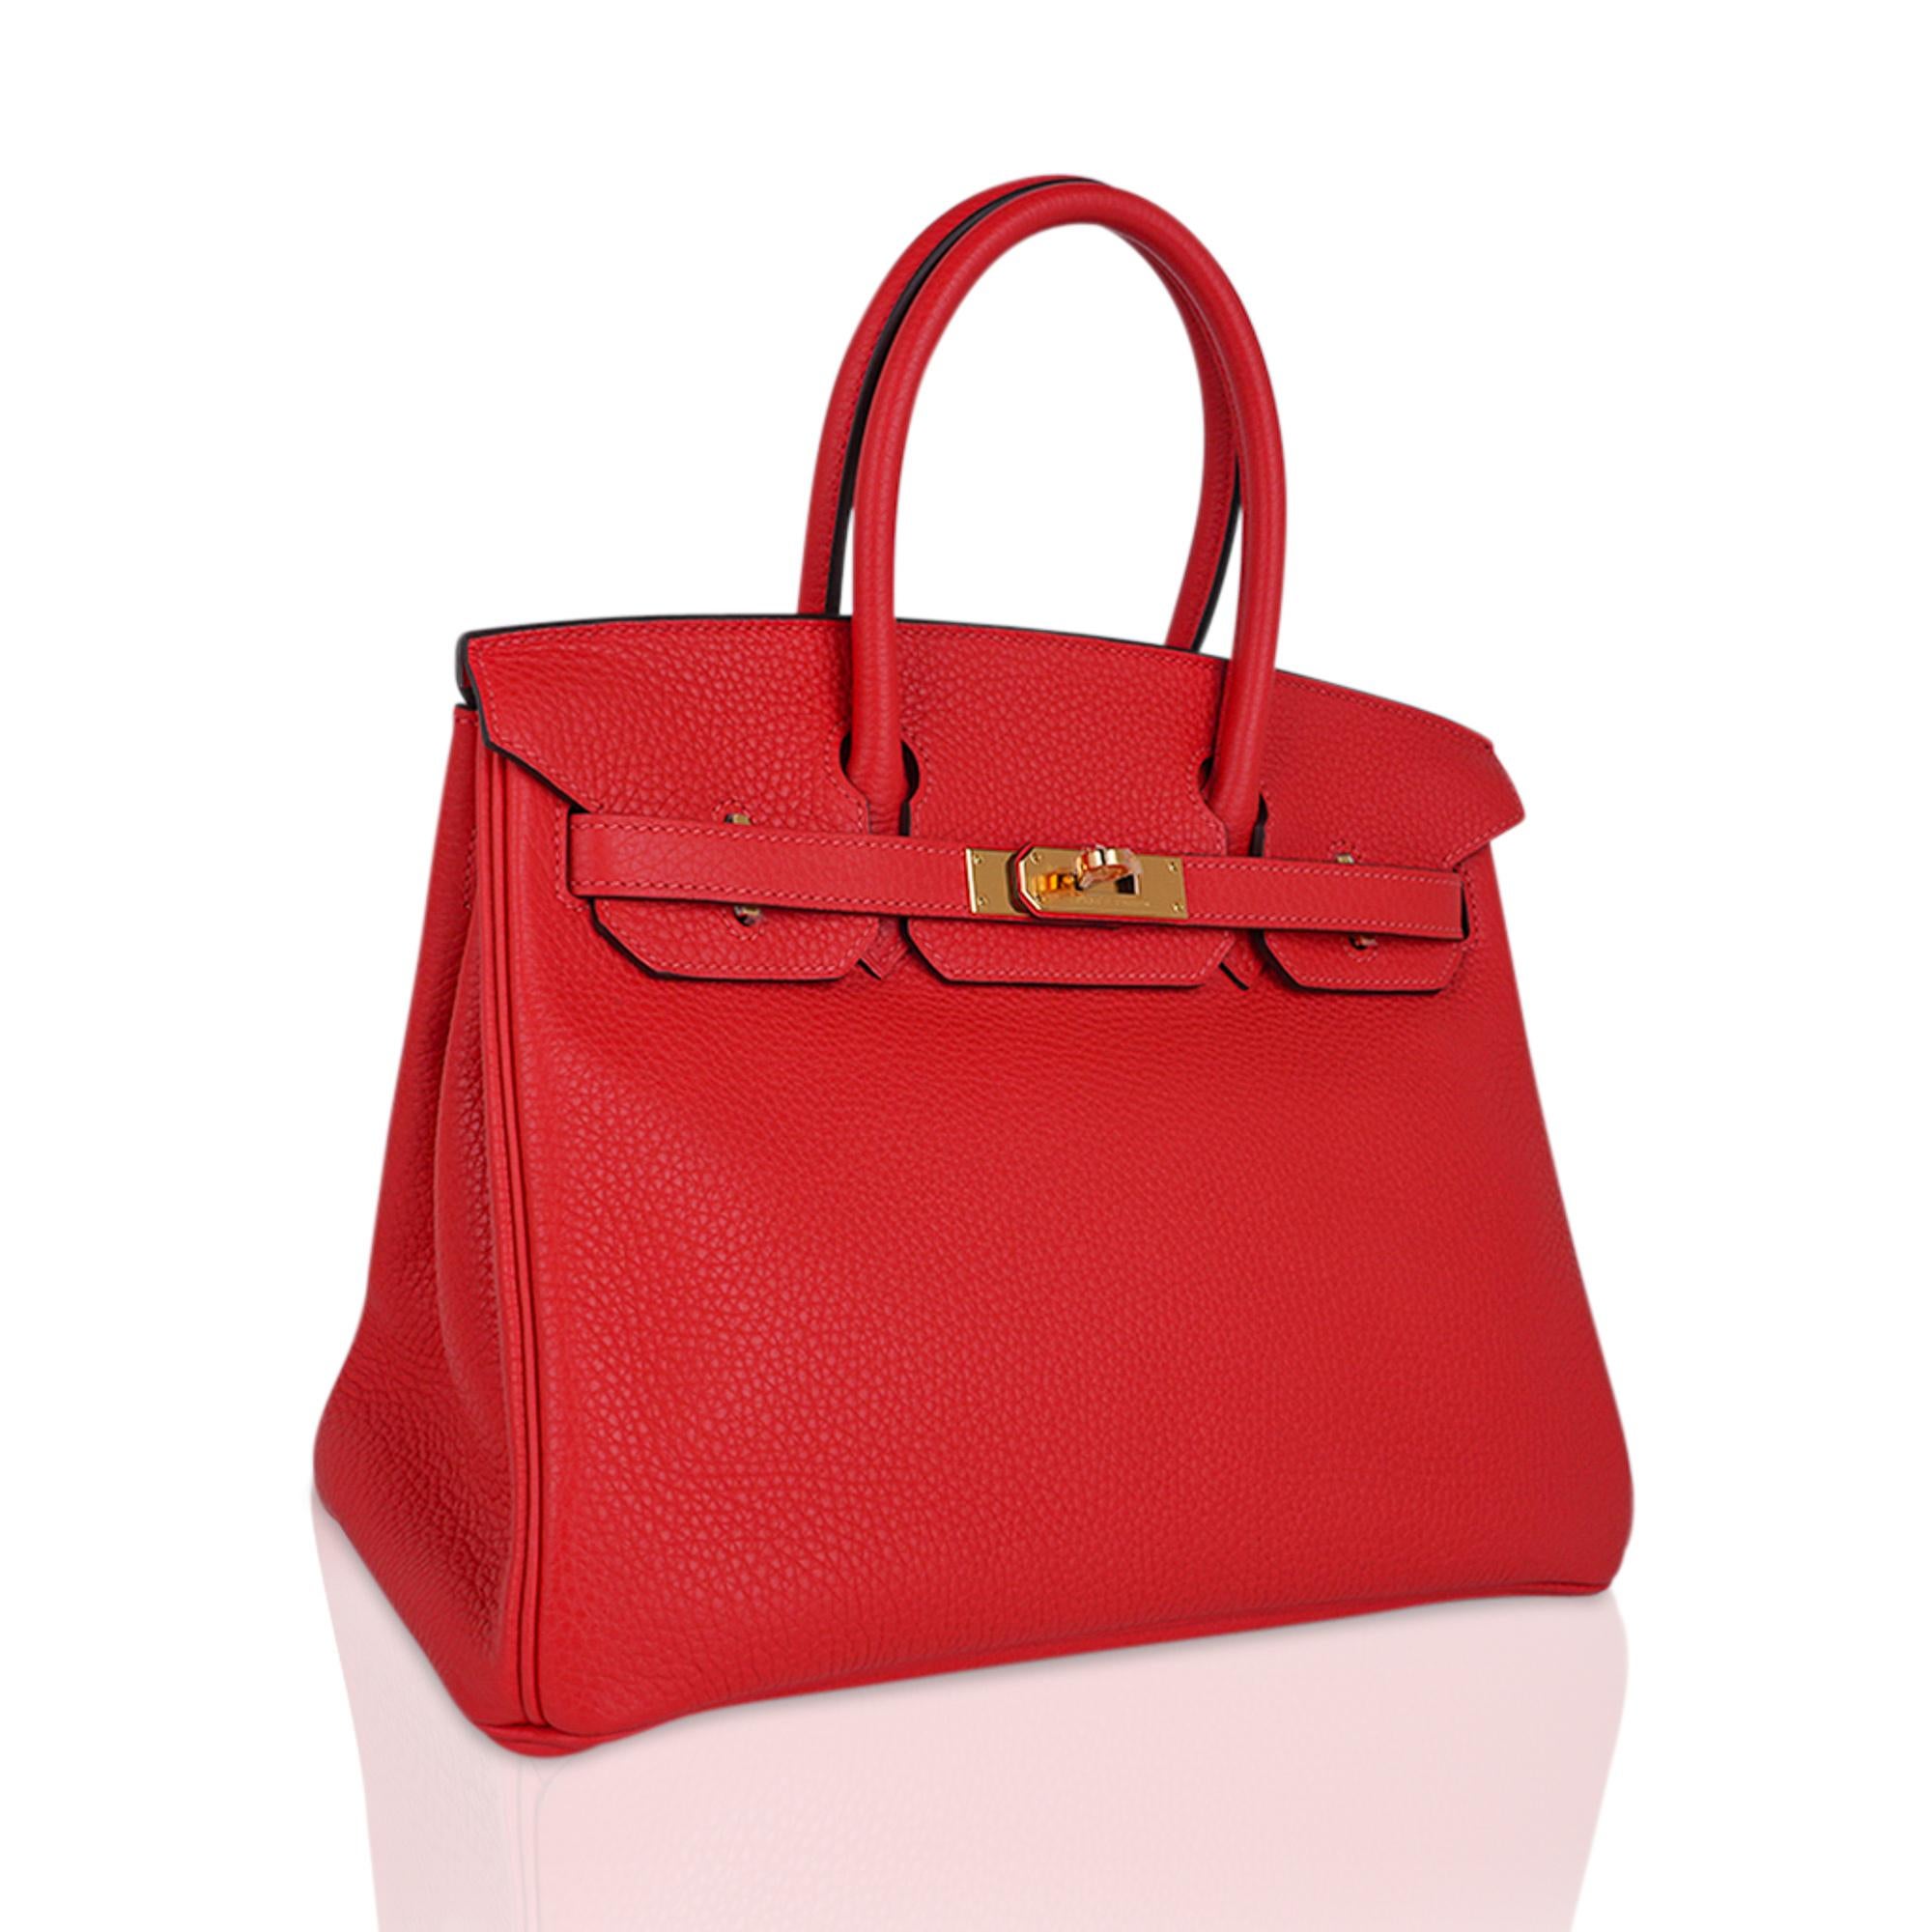 Mightychic offers an Hermes Birkin 30 bag featured in spicy Capucine.
Togo leather with rich gold hardware accentuates the beautiful colour of this Birkin bag.
This beauty will take you year round.
Comes with the lock and keys in the clochette,